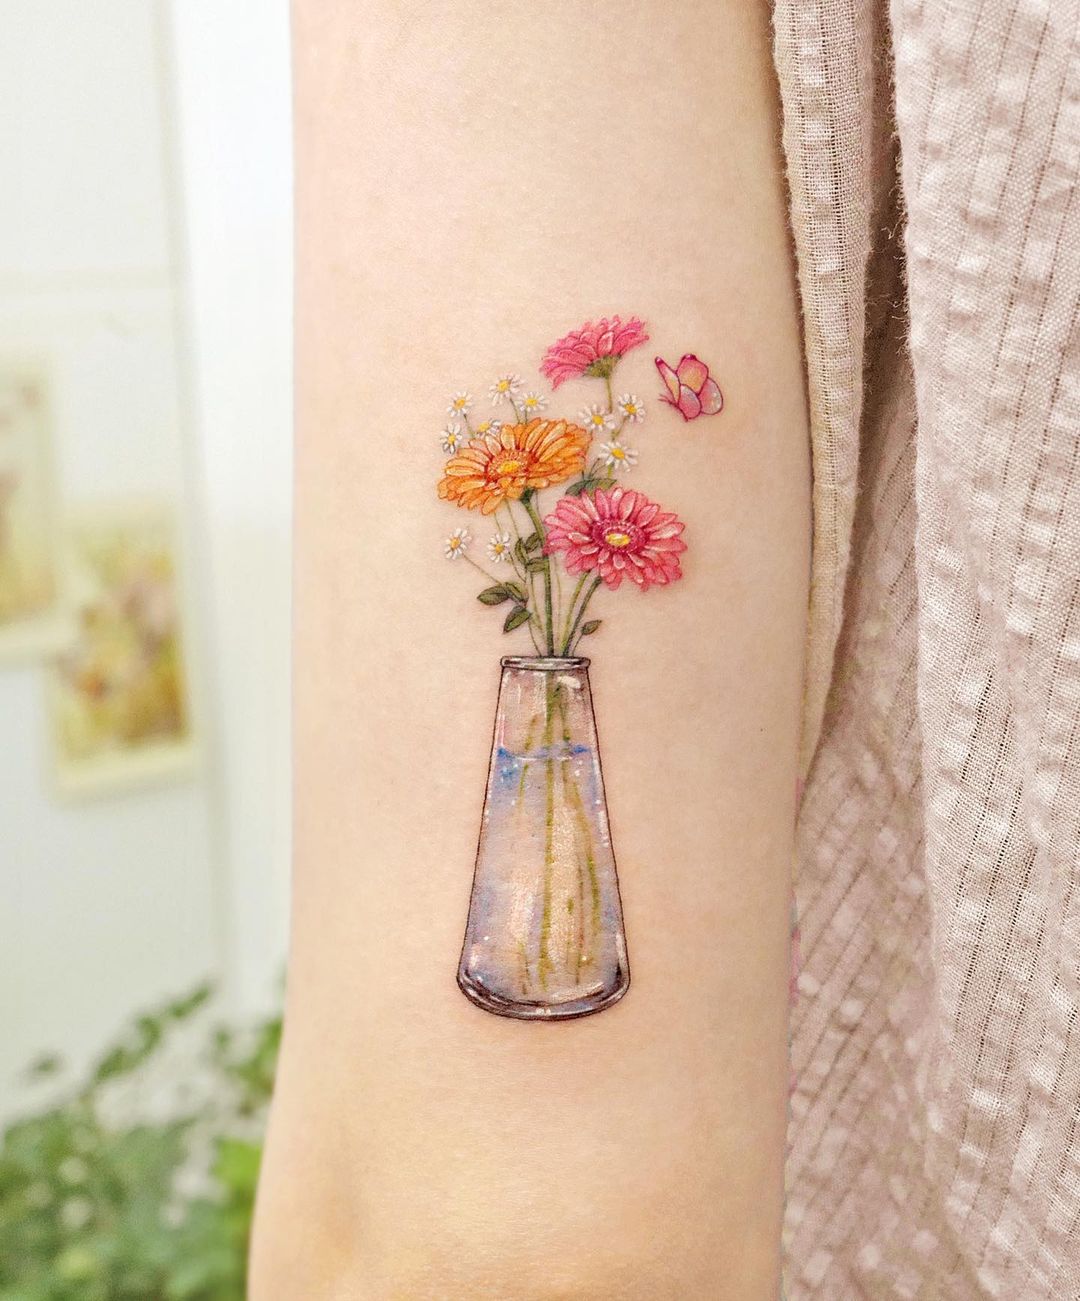 Brilliant Coverup Tattoos Combine Blackout Ink with Blossoms